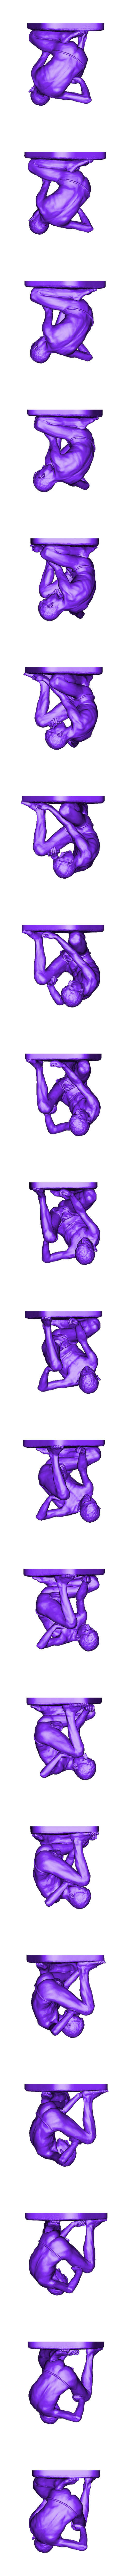 Marble_Player.stl Download free STL file Marble Player • 3D printer object, ThreeDScans